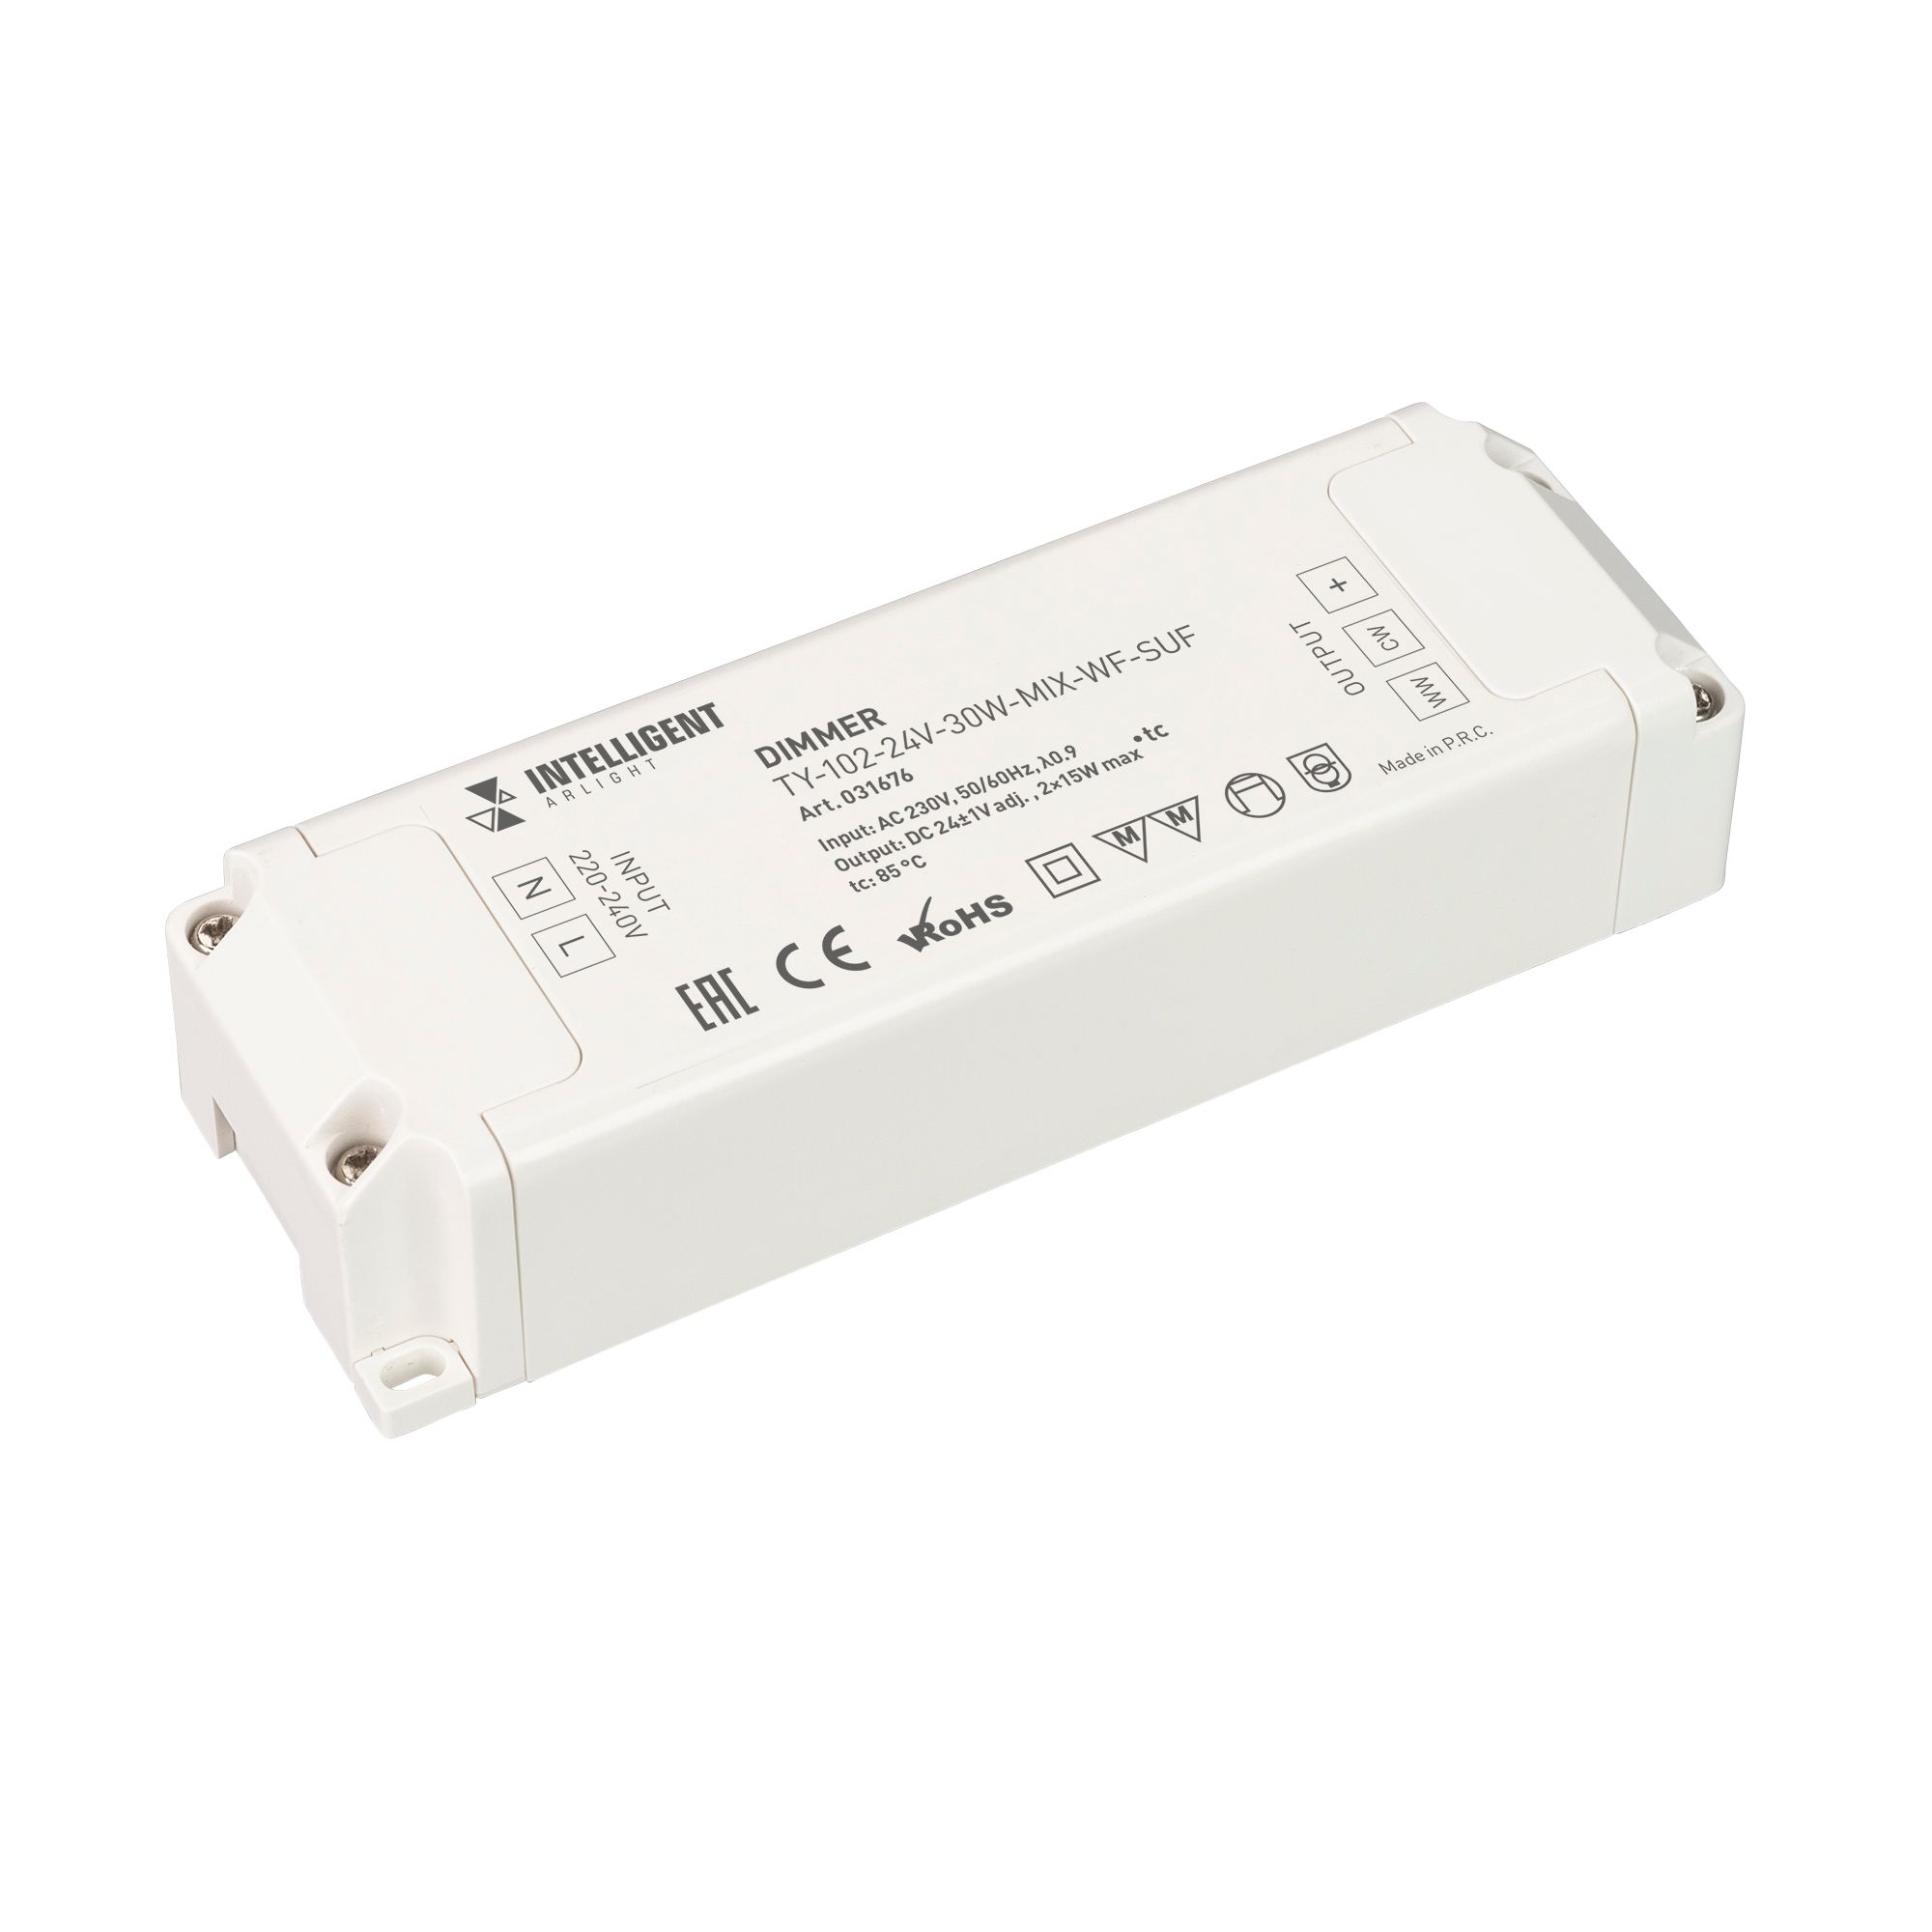 INTELLIGENT ARLIGHT Диммер TY-102-24V-30W-MIX-WF-SUF (230V, WIFI, 433MHz, 2x0.6A) (IARL, Пластик) tuya wifi intelligent reclosing protector current voltage monitoring circuit breaker switch power meter protections values settable mobilephone app control